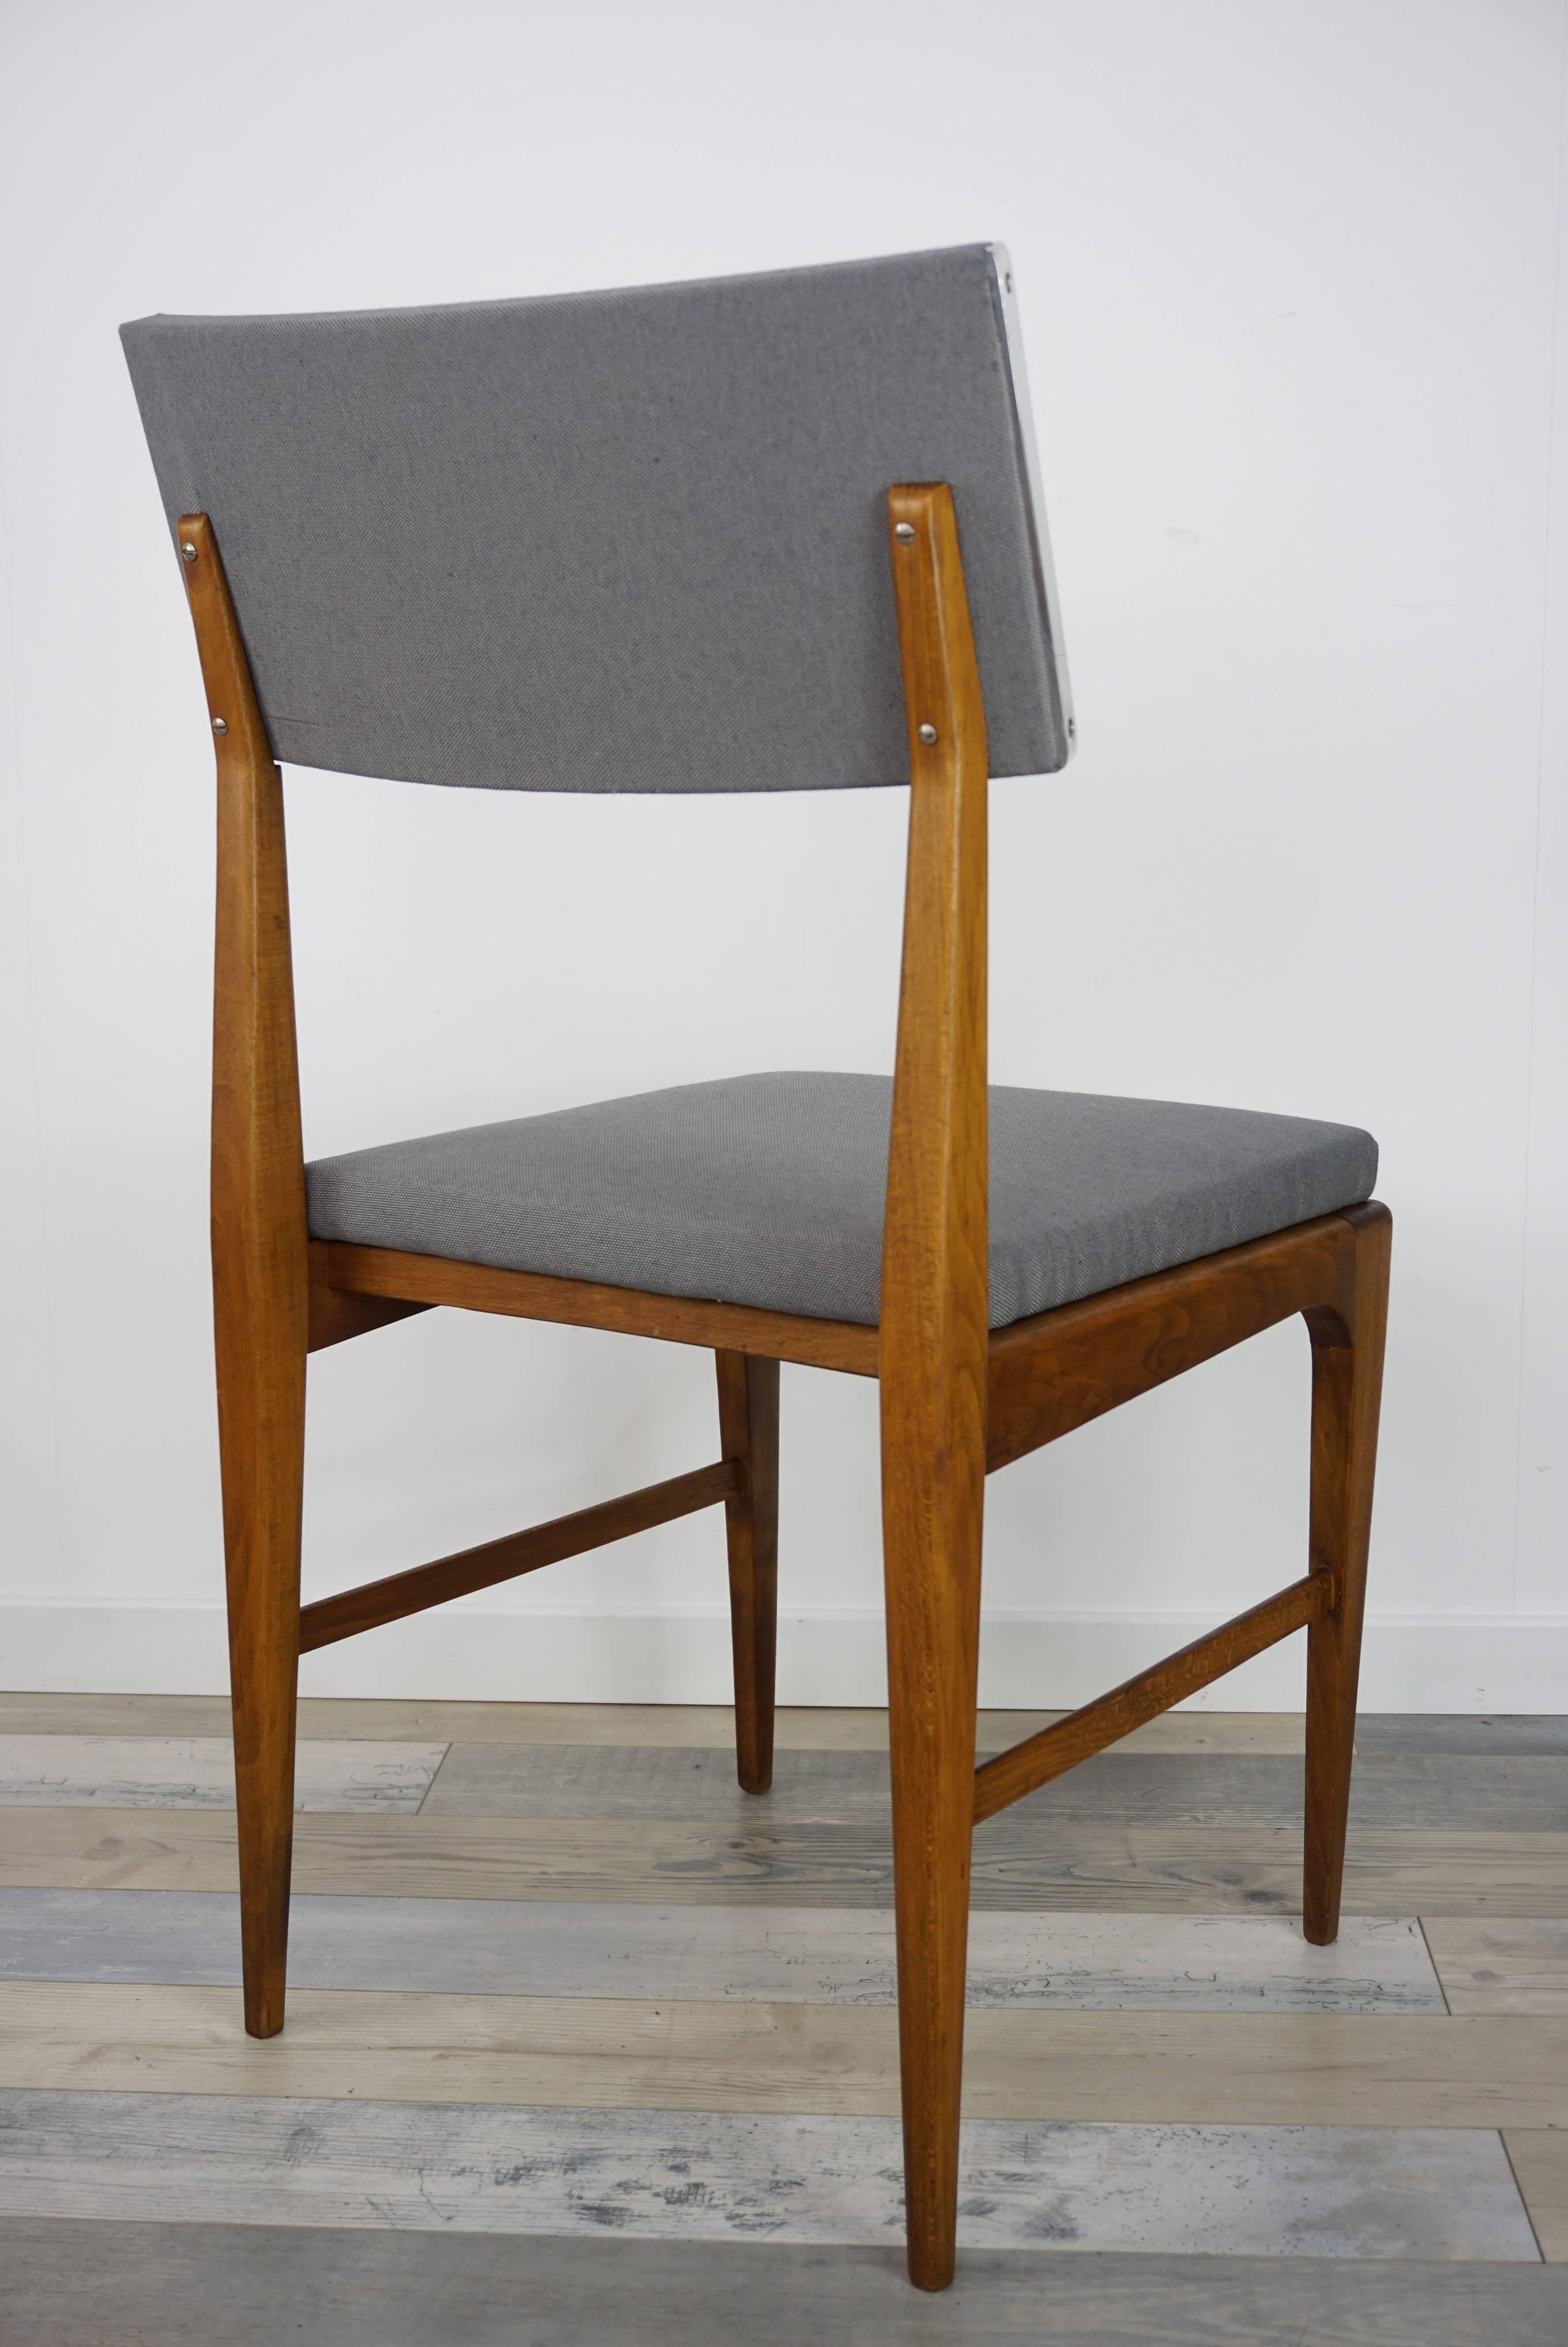 Mid-20th Century Set of Four Wooden Teak and Fabric Scandinavian Style Dutch Design Chairs